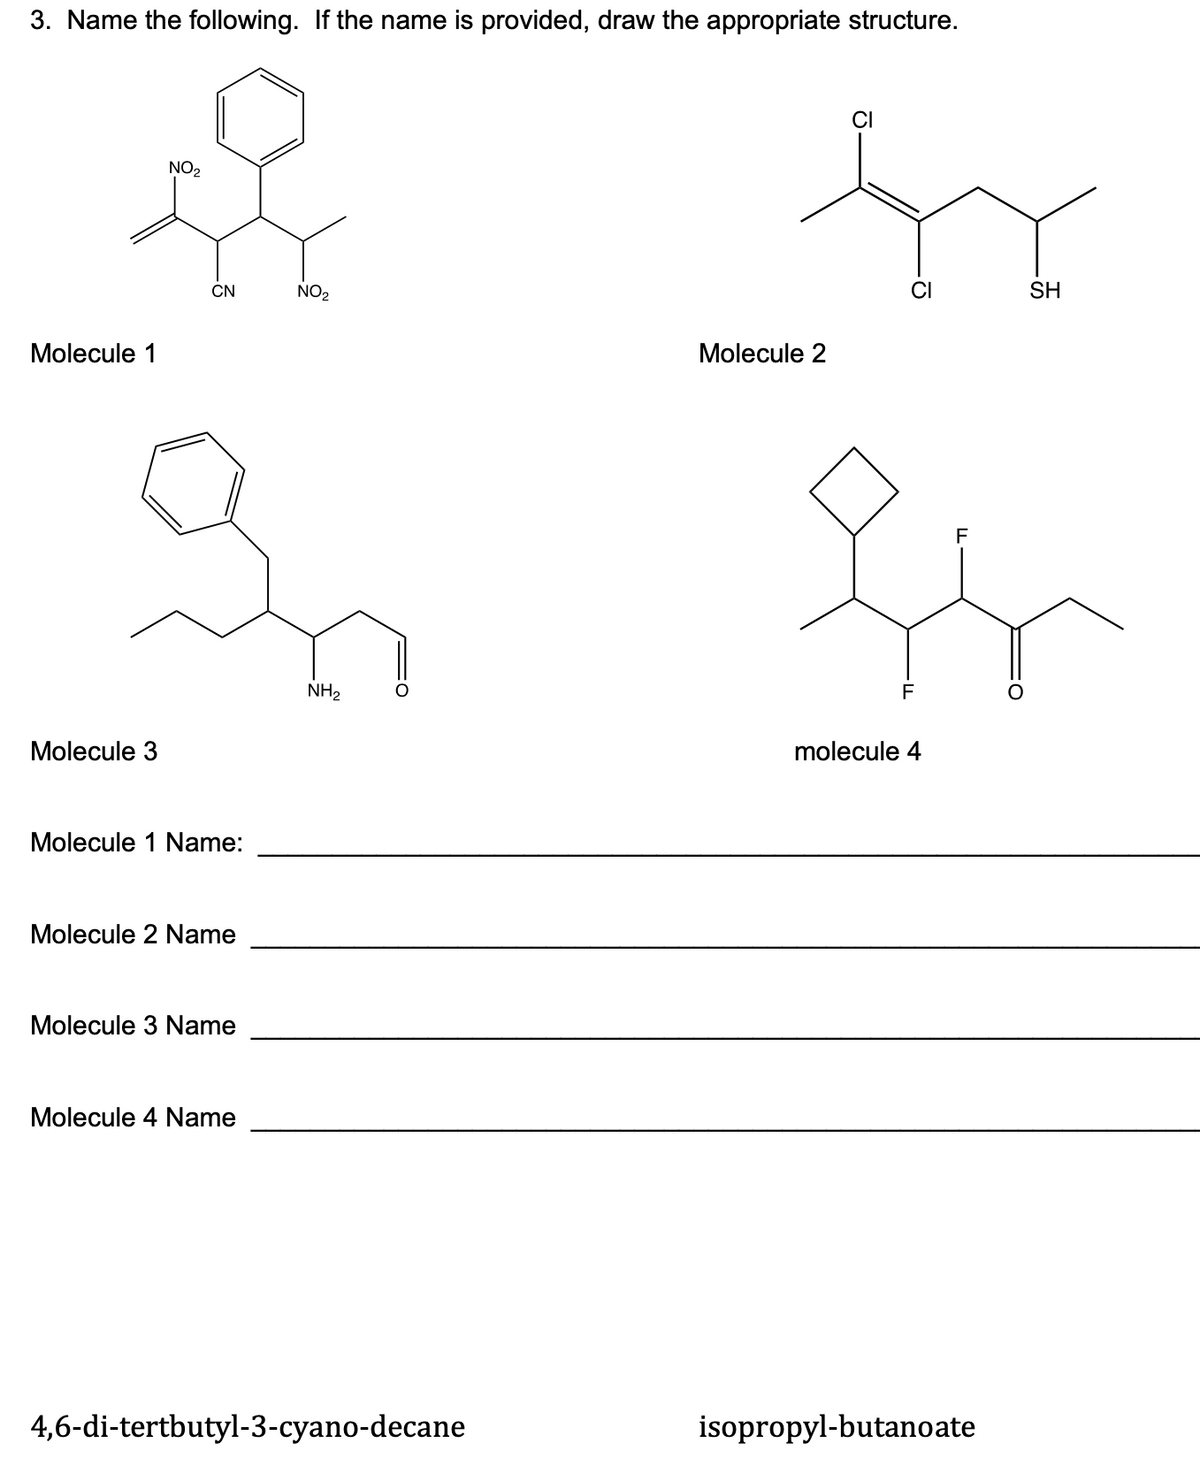 3. Name the following. If the name is provided, draw the appropriate structure.
NO2
CN
NO2
SH
Molecule 1
Molecule 2
NH2
F
Molecule 3
molecule 4
Molecule 1 Name:
Molecule 2 Name
Molecule 3 Name
Molecule 4 Name
4,6-di-tertbutyl-3-cyano-decane
isopropyl-butanoate
